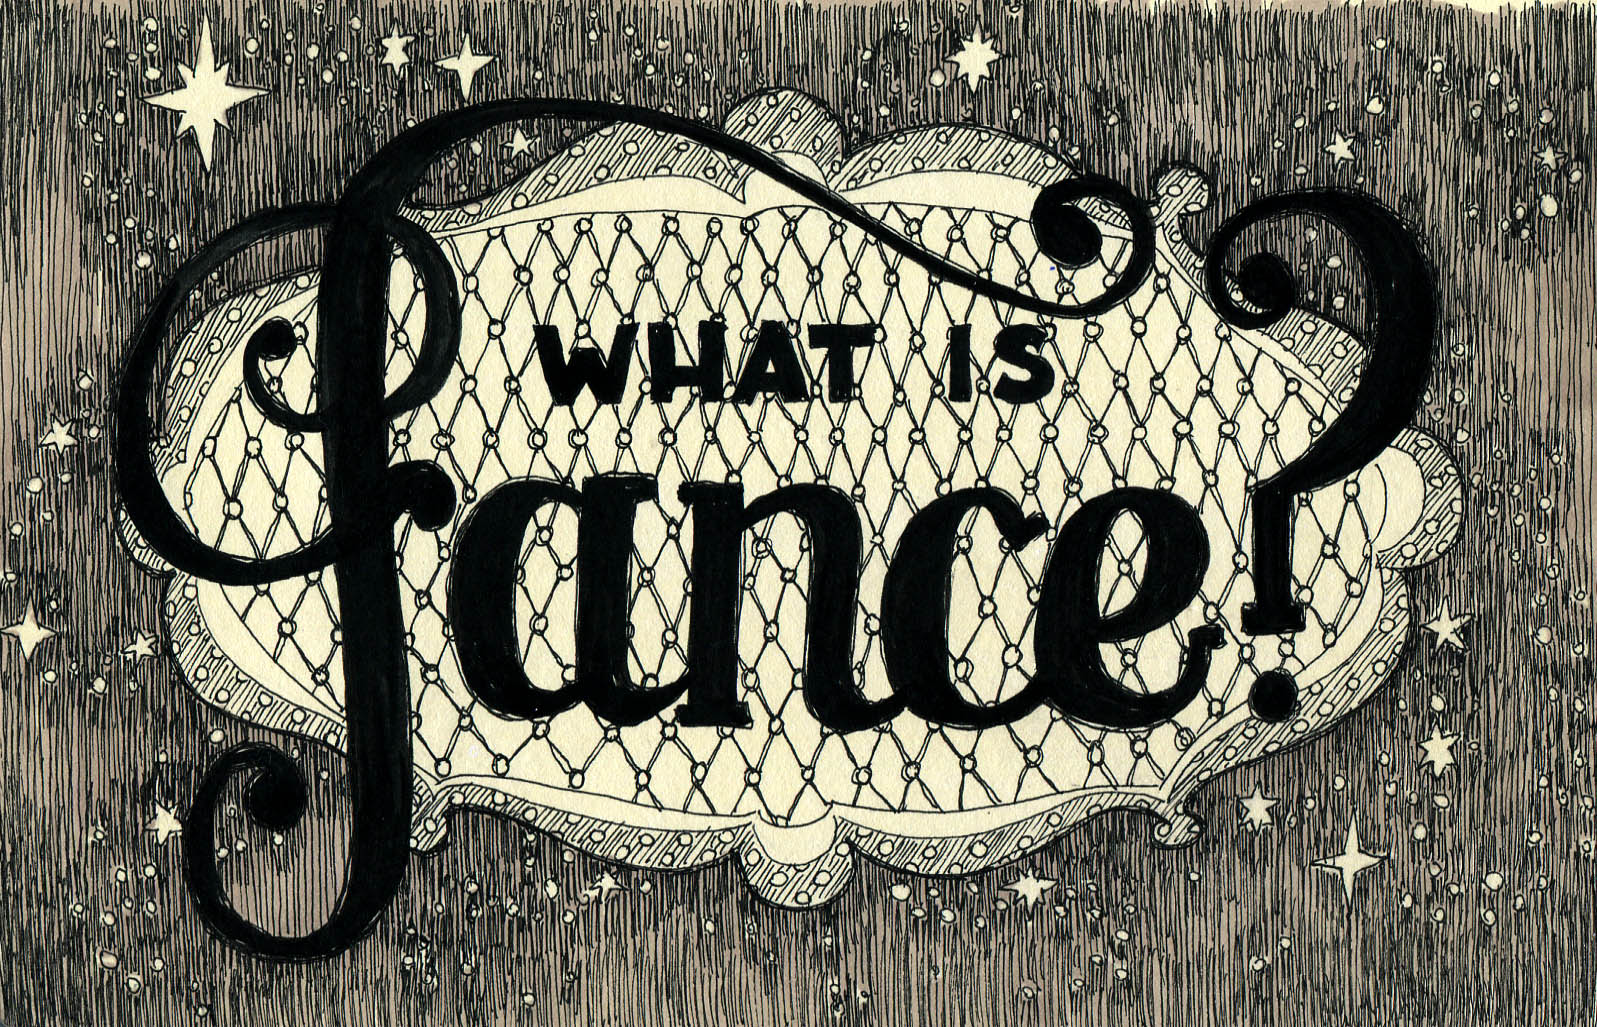 What is fance?